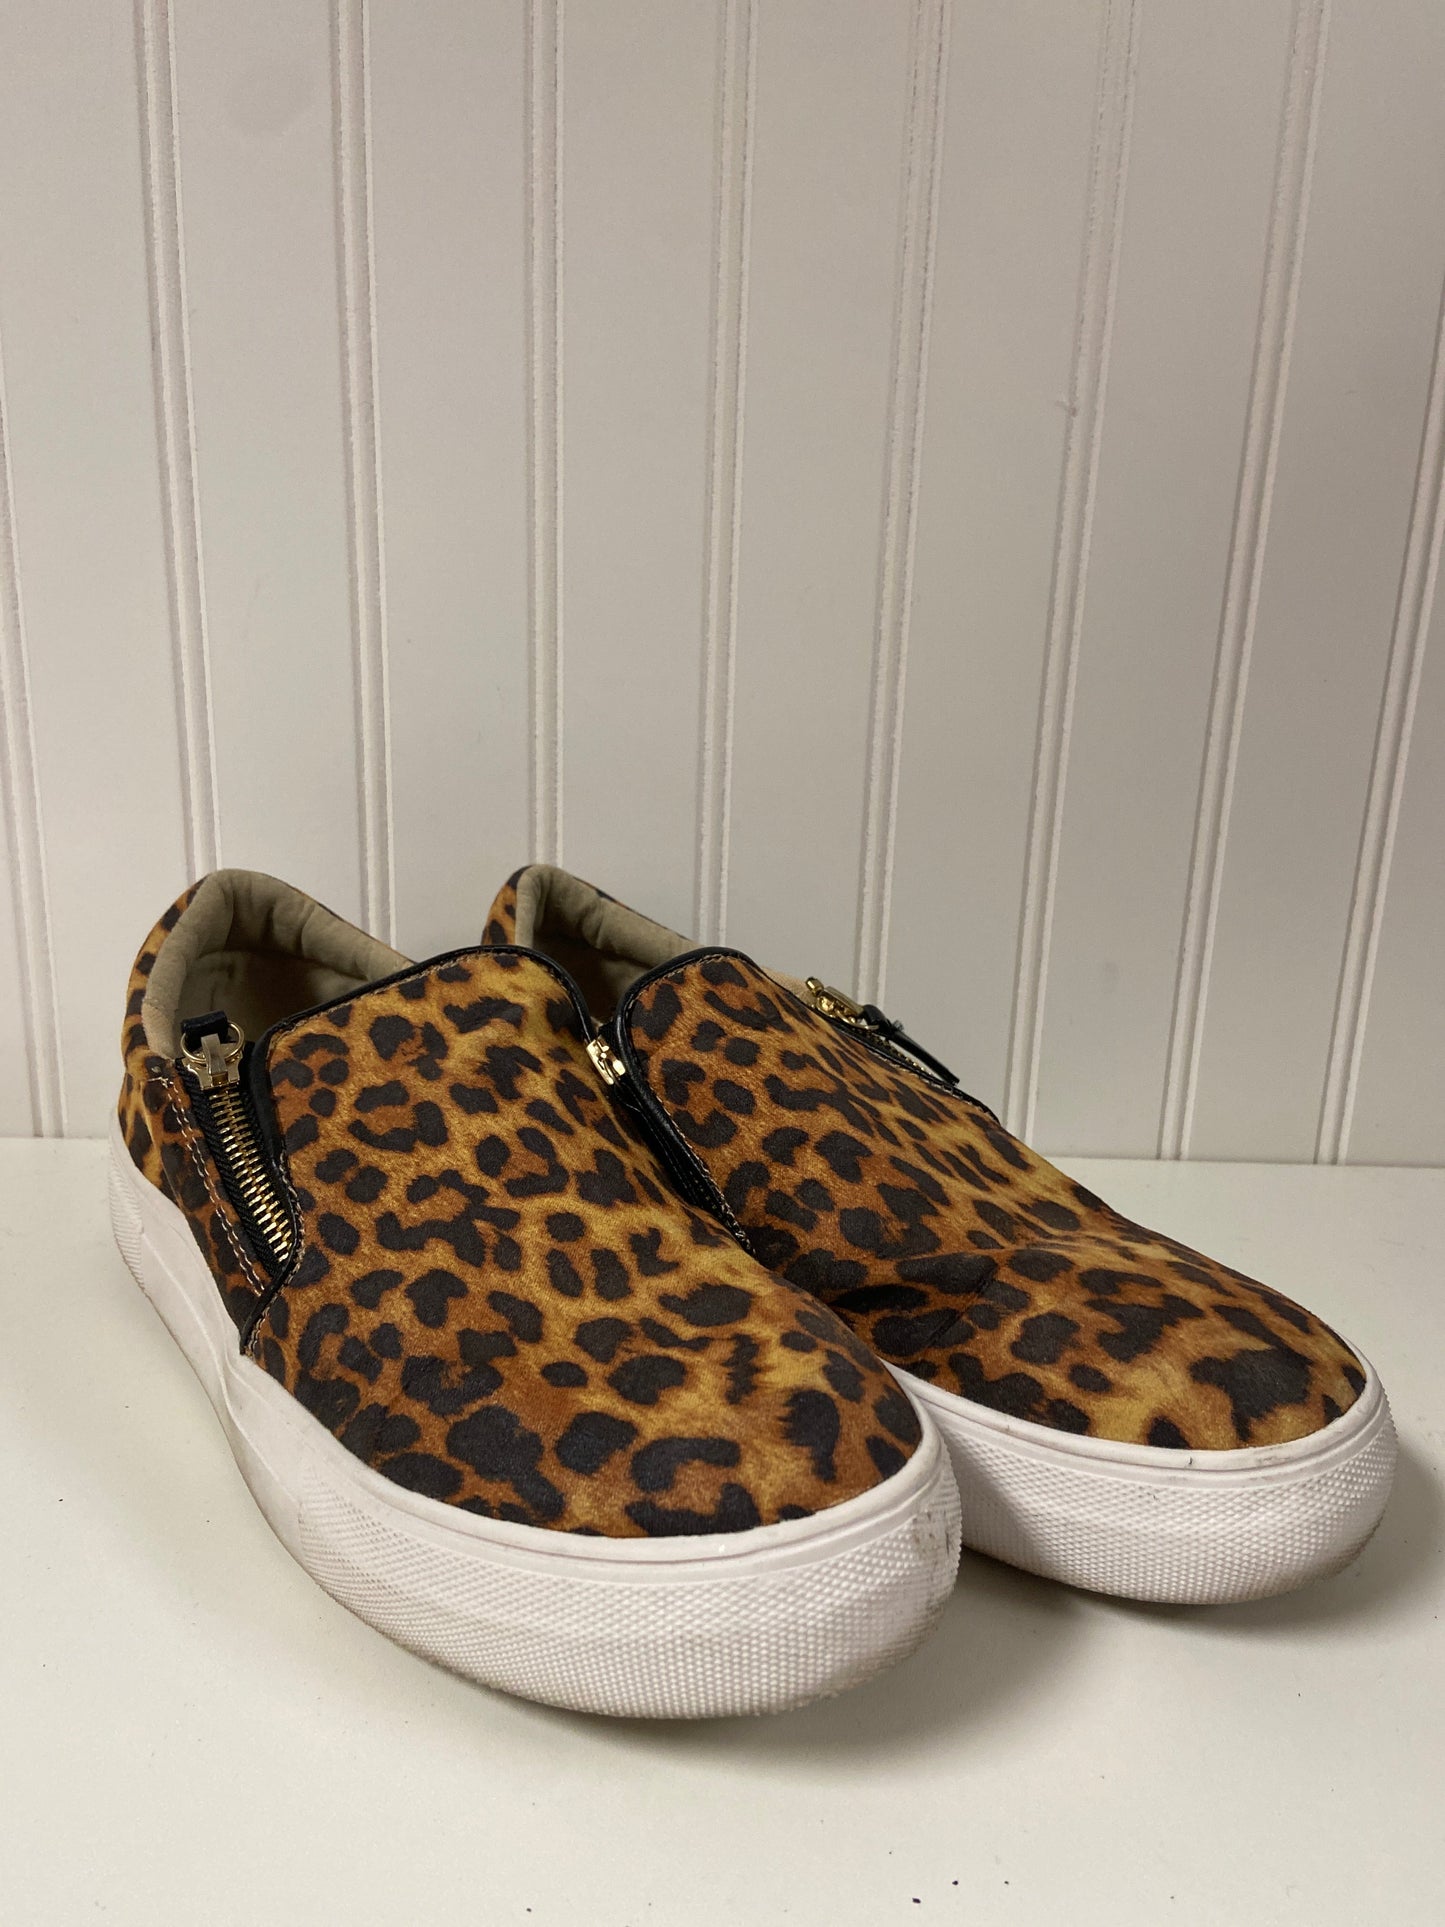 Animal Print Shoes Flats Not Rated, Size 8.5